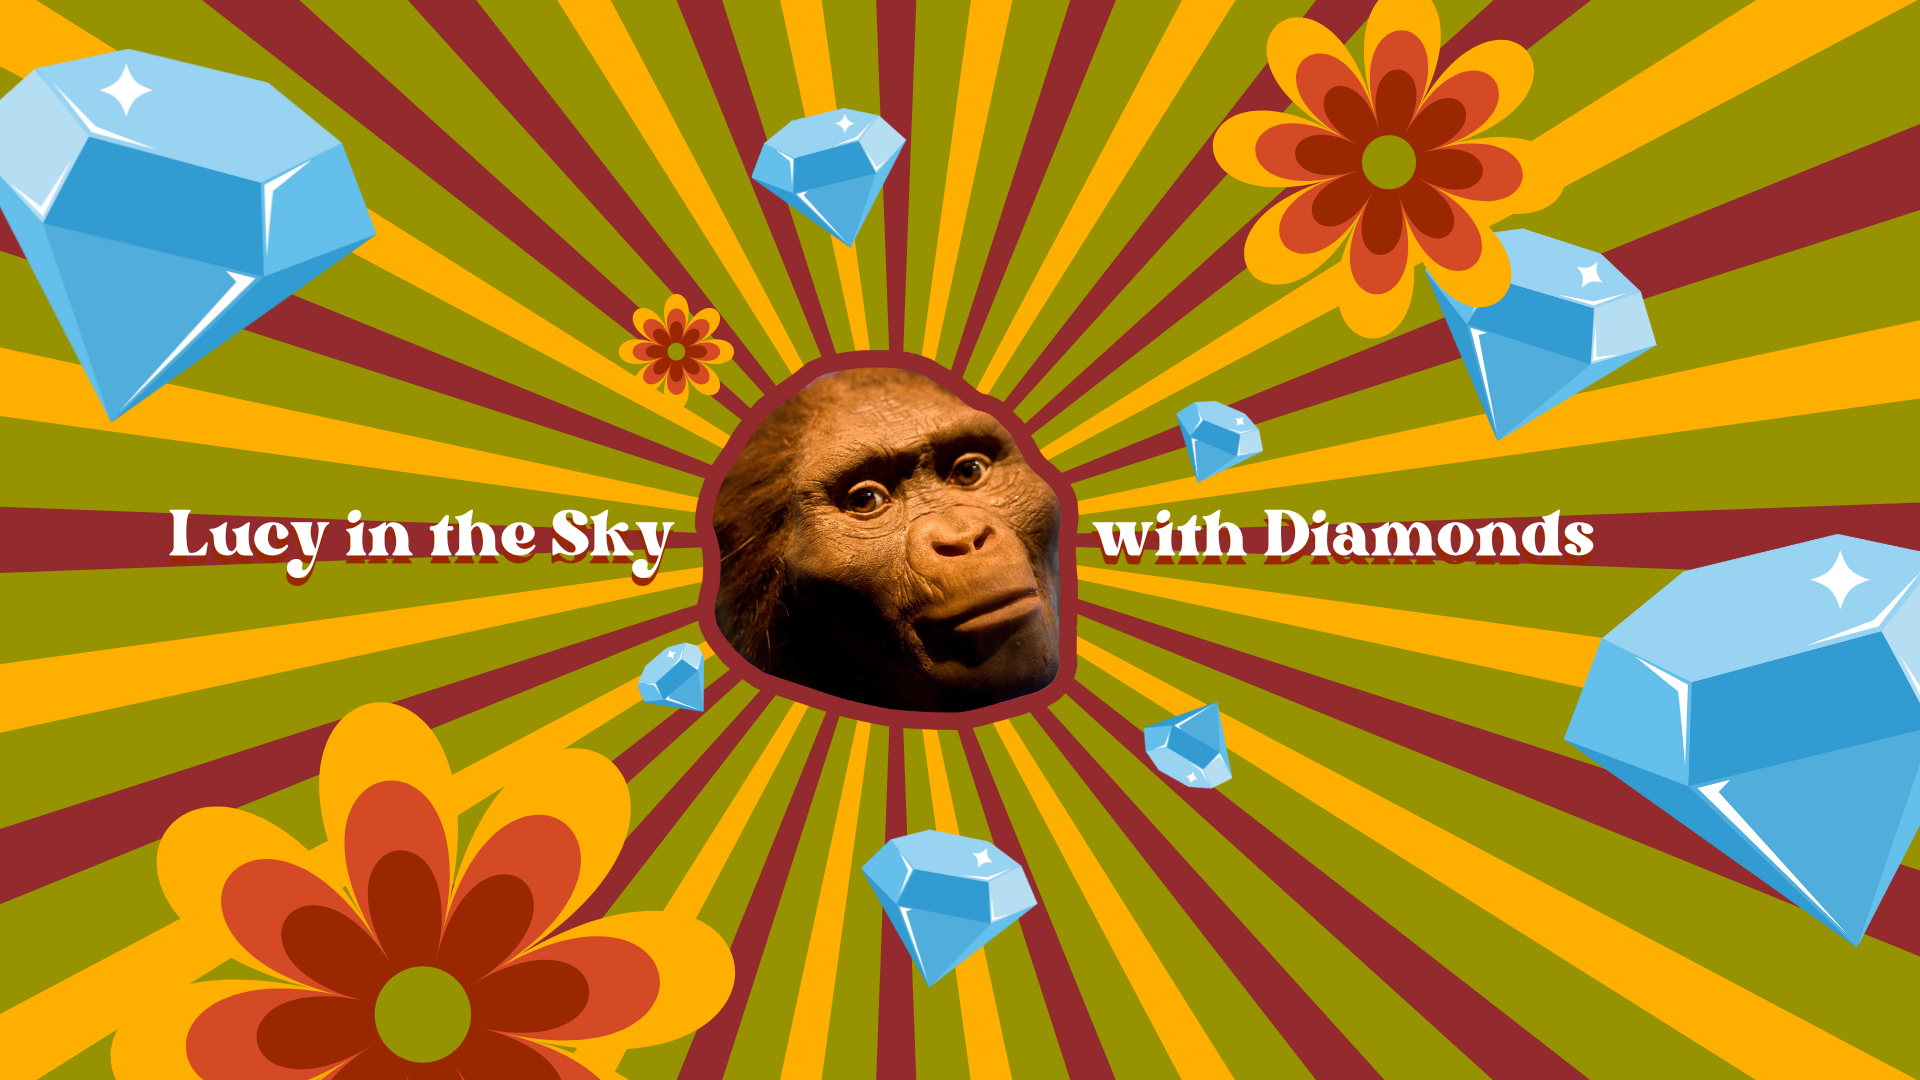 Science en chansons: "Lucy in the Sky with Diamonds" des Beatles.